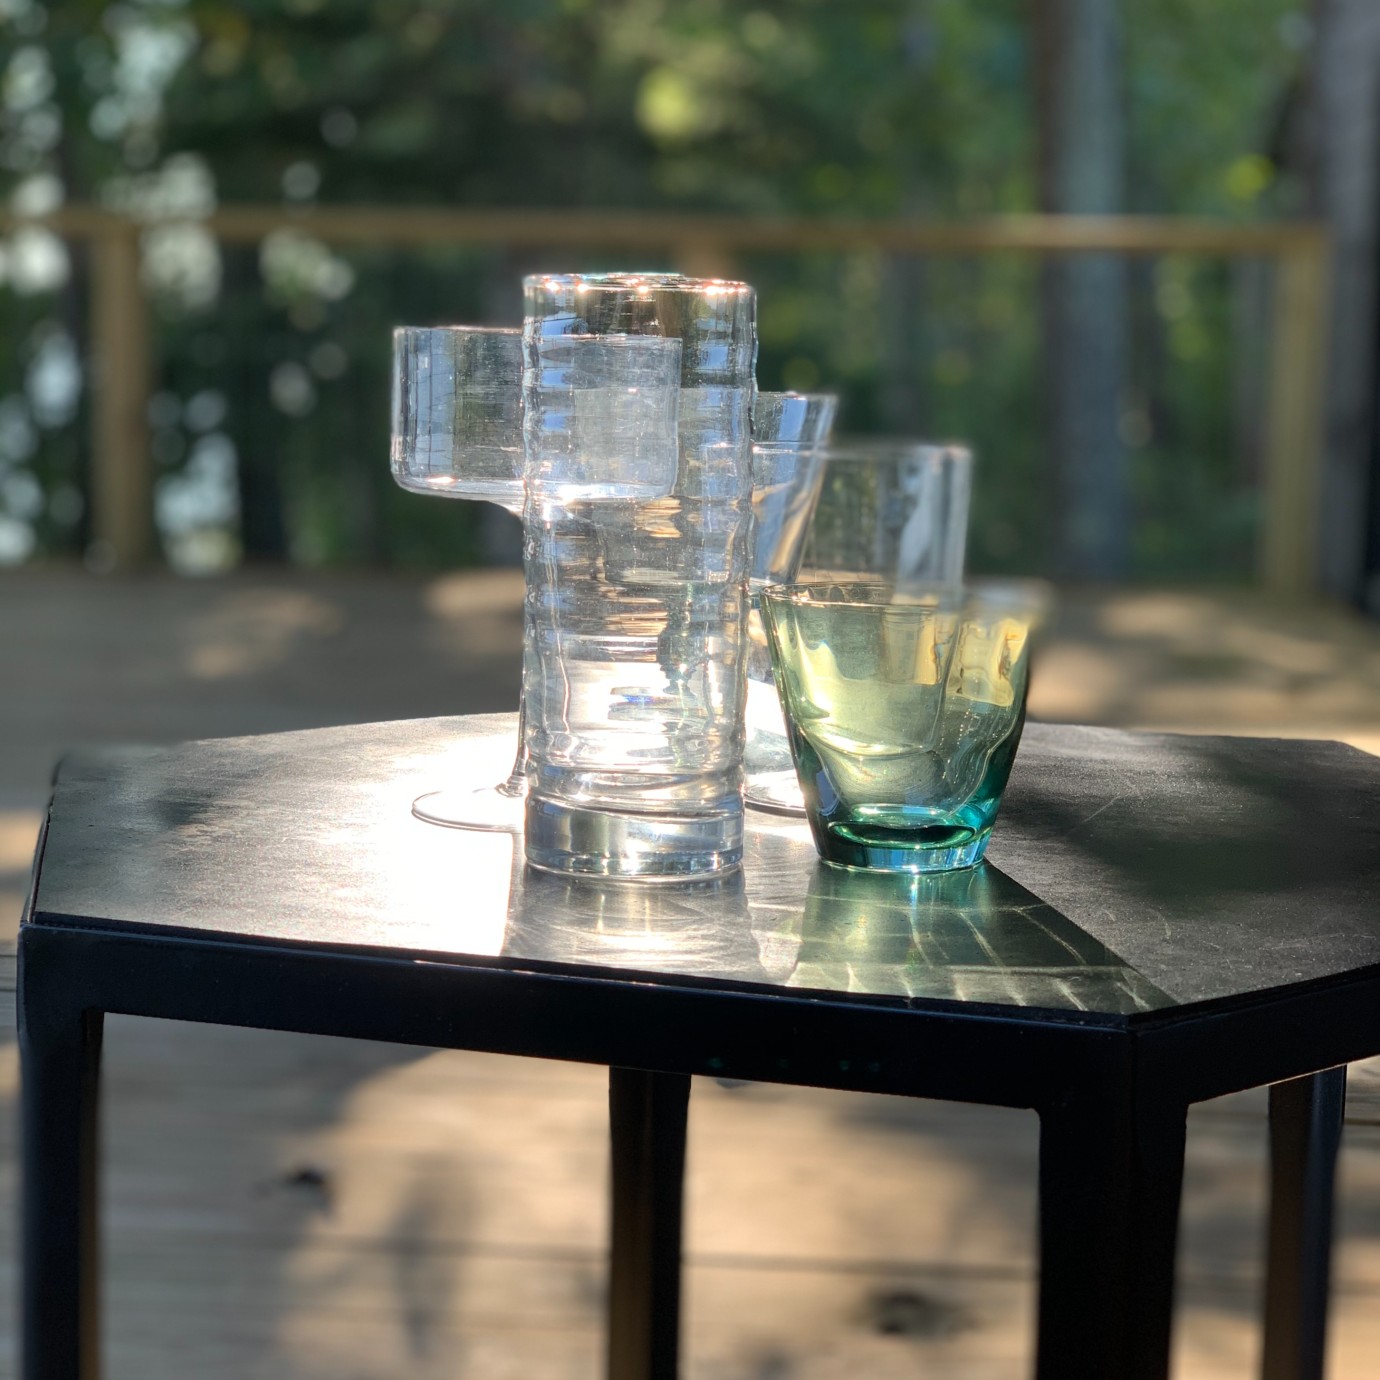 Alton Brown's cocktail glasses displayed outdoors on a black end table.